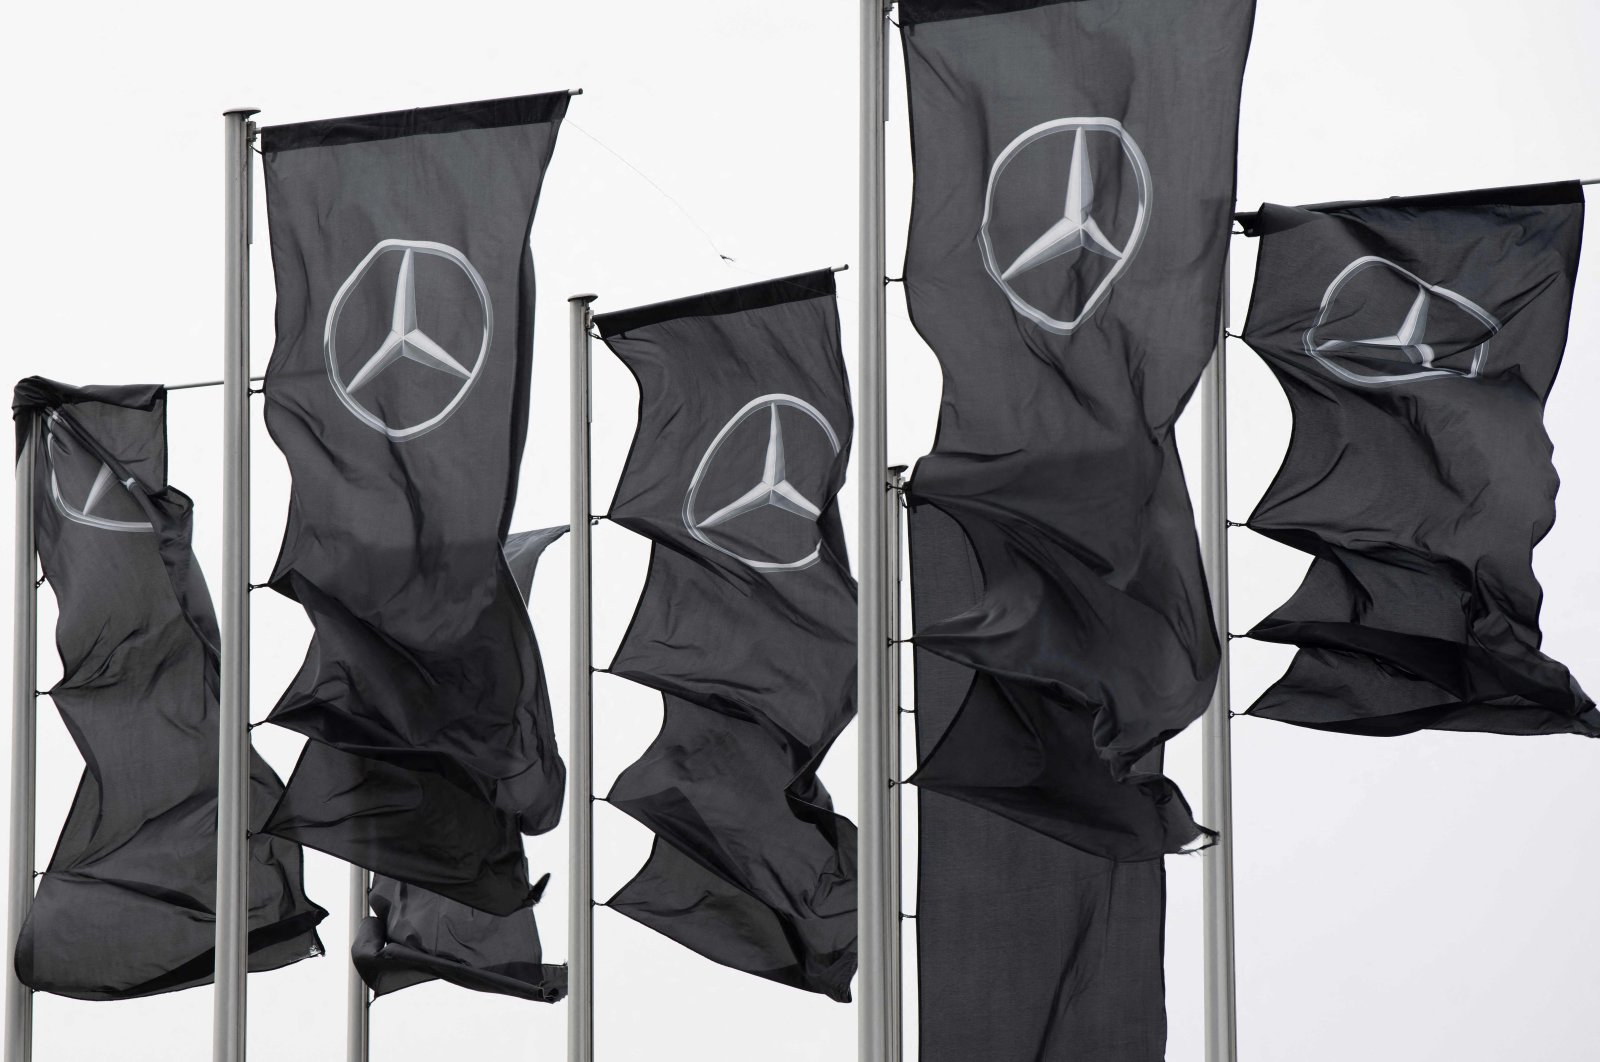 Flags with the Mercedes-Benz logo are seen in front of the Mercedes-Benz Museum in Stuttgart, southern Germany, Feb. 1, 2022. (AFP Photo)